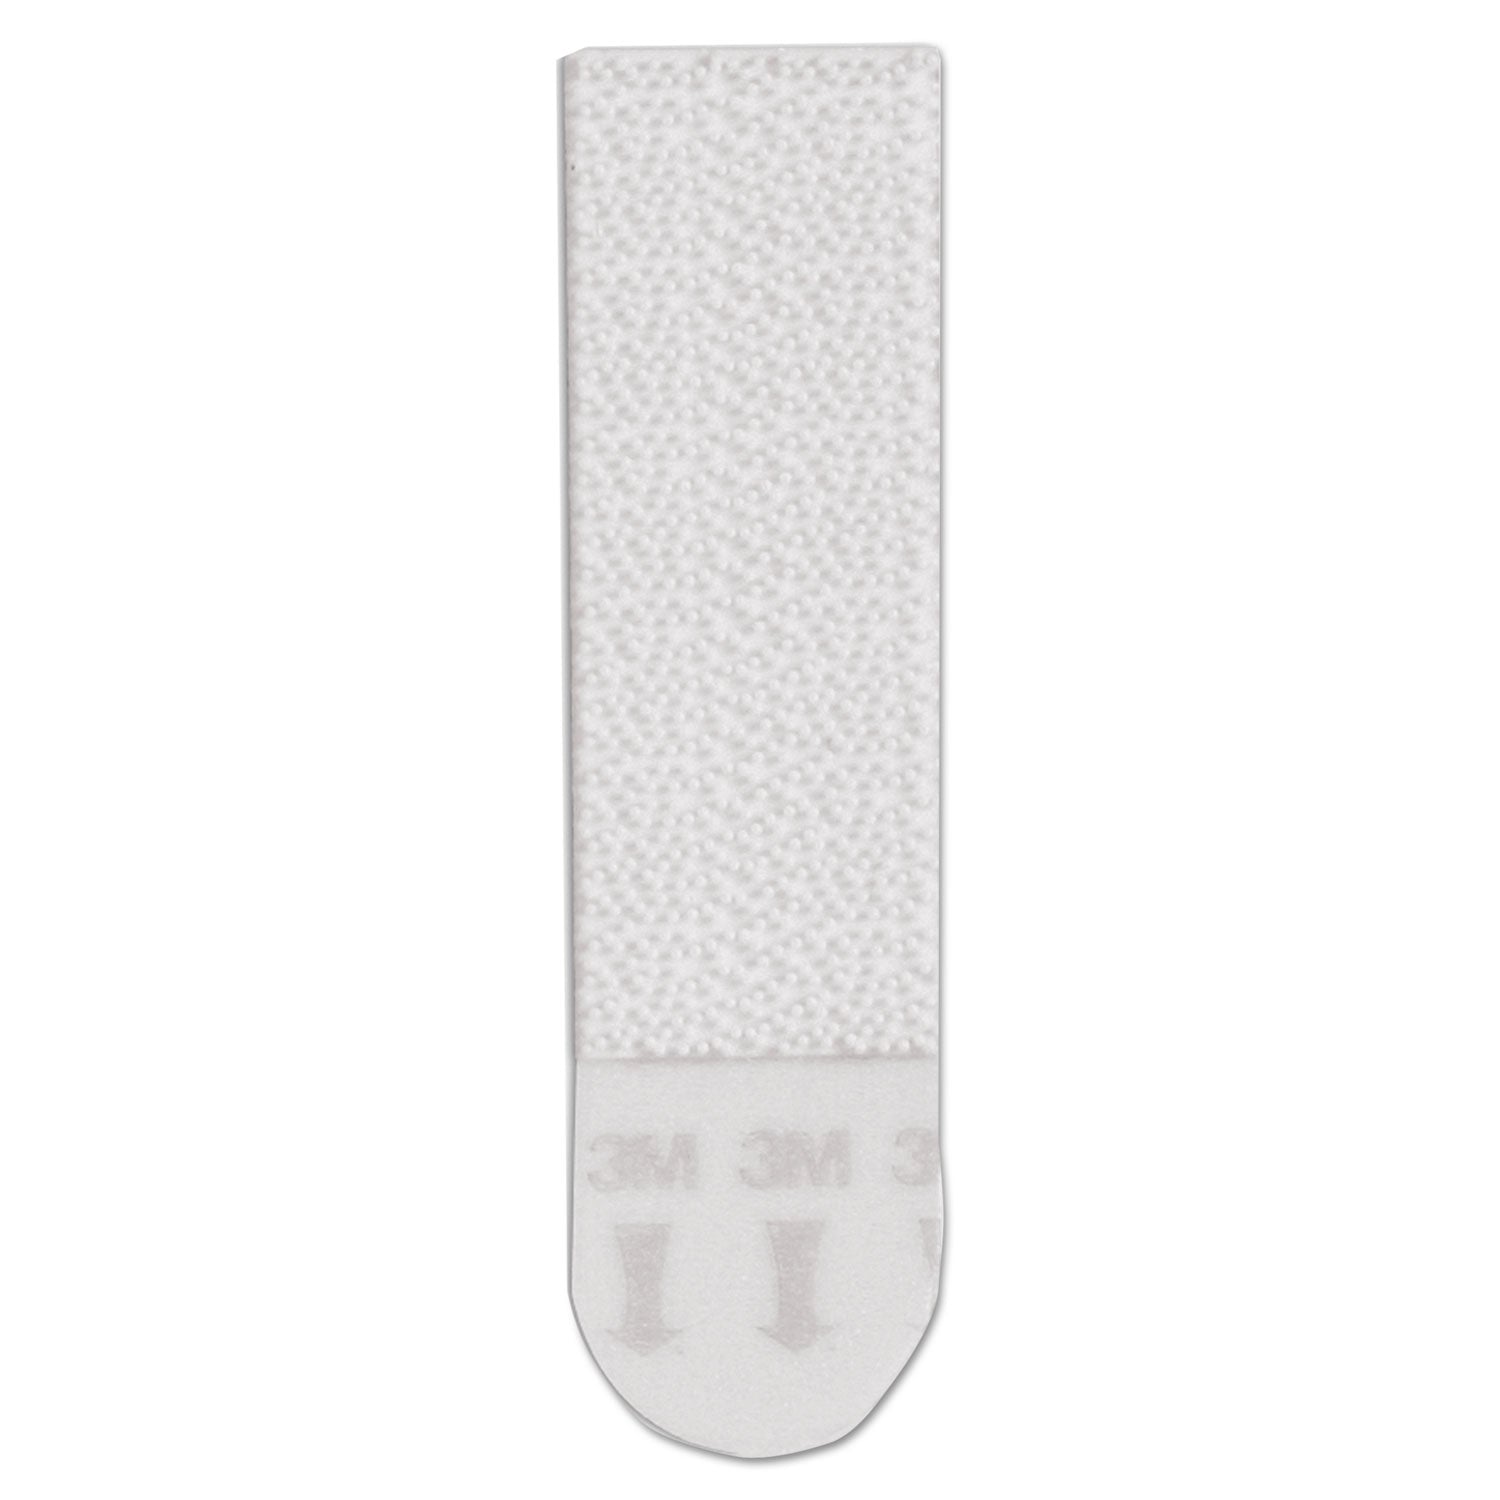 picture-hanging-strips-removable-holds-up-to-3-lbs-per-pair-075-x-275-white-3-pairs-pack_mmm17201es - 3